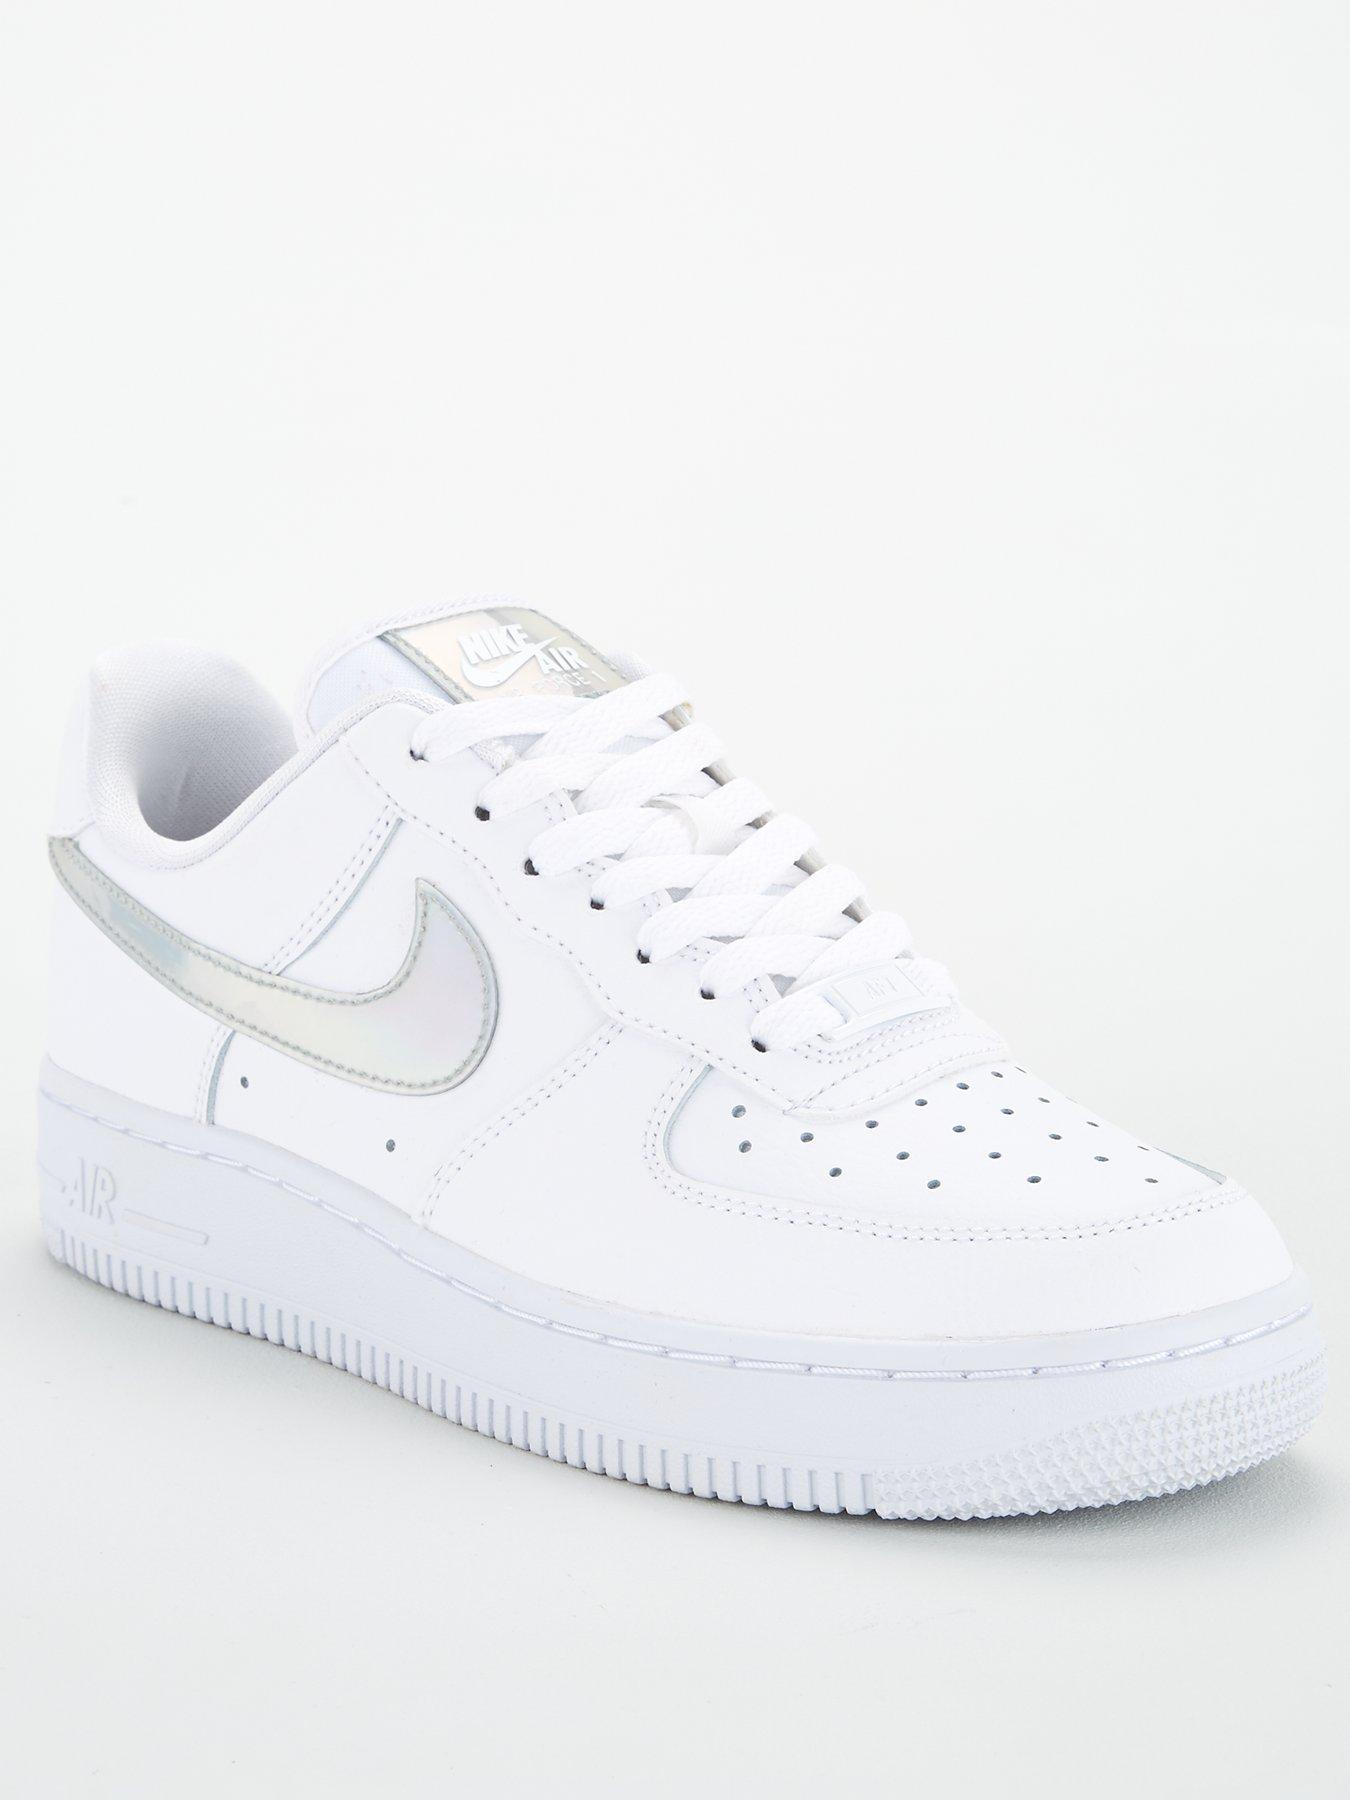 air force 1 white and silver